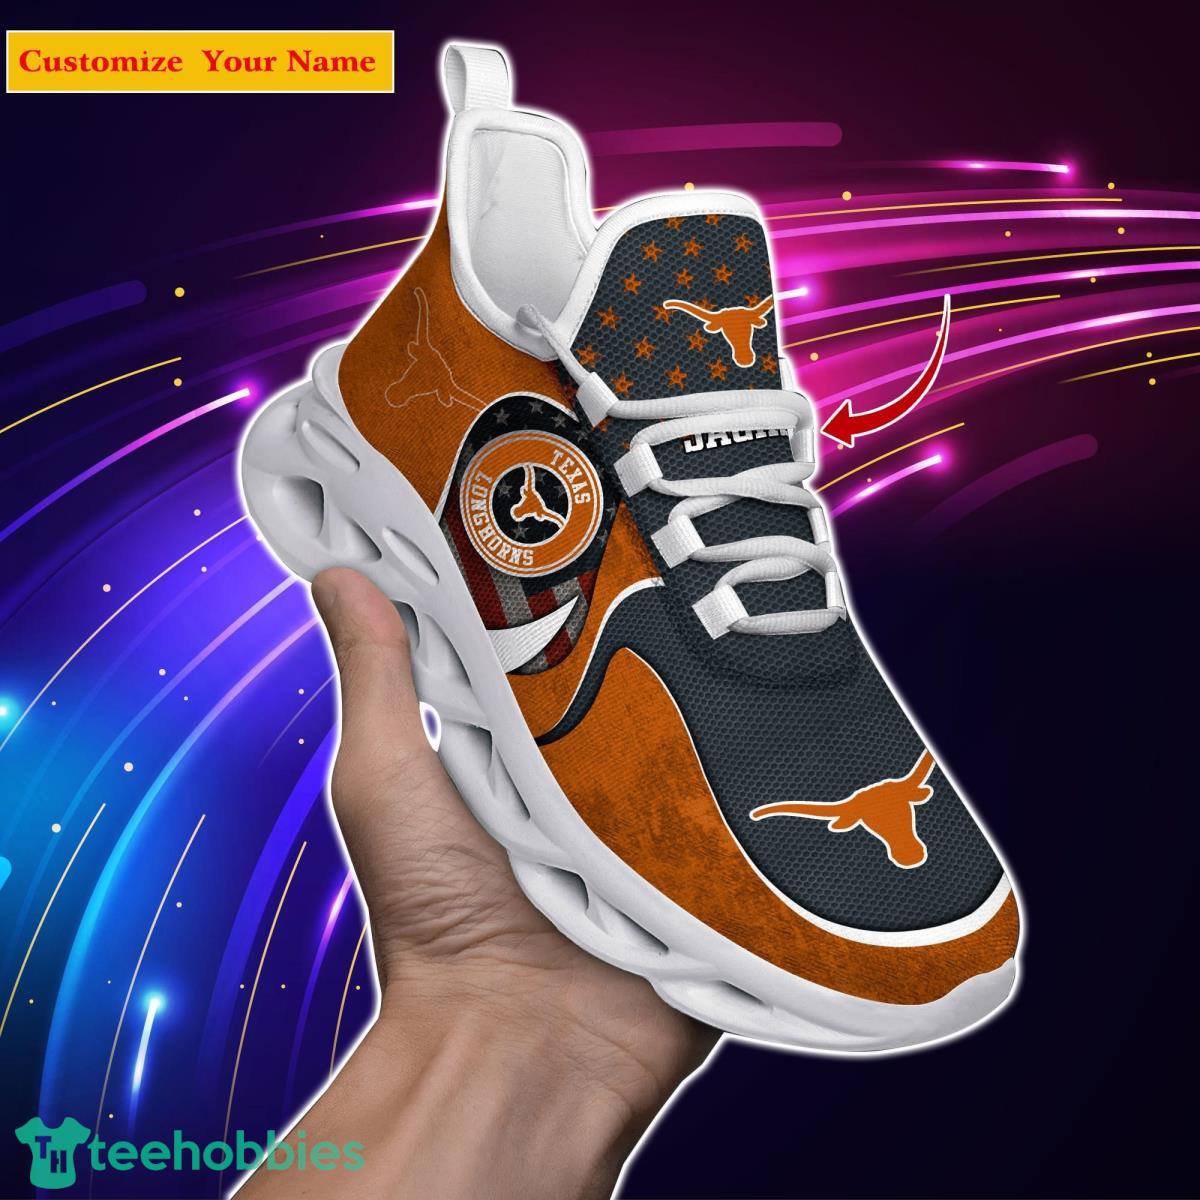 Texas Longhorns NCAA2 Custom Name Max Soul Shoes Special Gift For Men Women Fans Product Photo 1